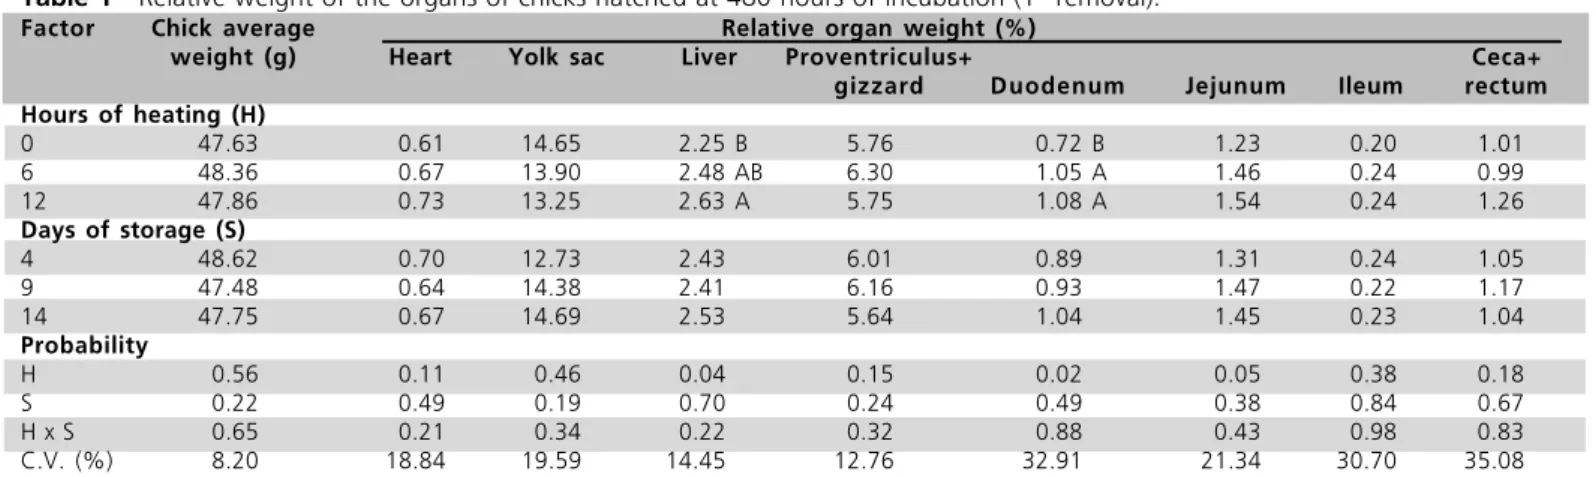 Table 1  - Relative weight of the organs of chicks hatched at 480 hours of incubation (1 st  removal).